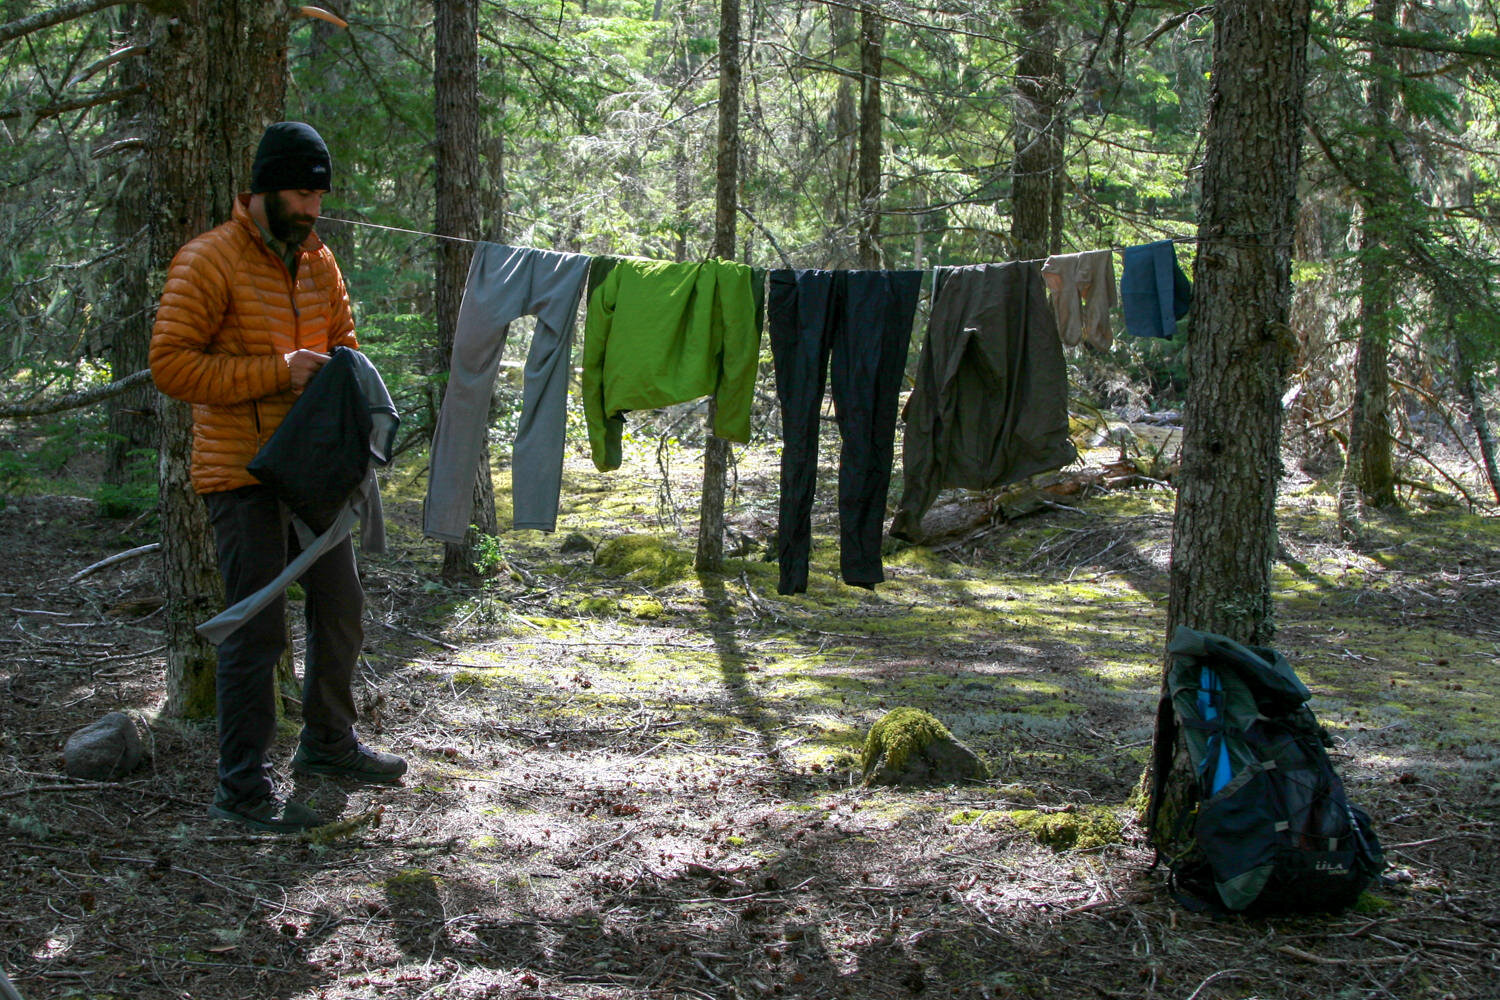 Airflow and a few minutes of direct sunlight can go a long way when you need to dry damp gear.